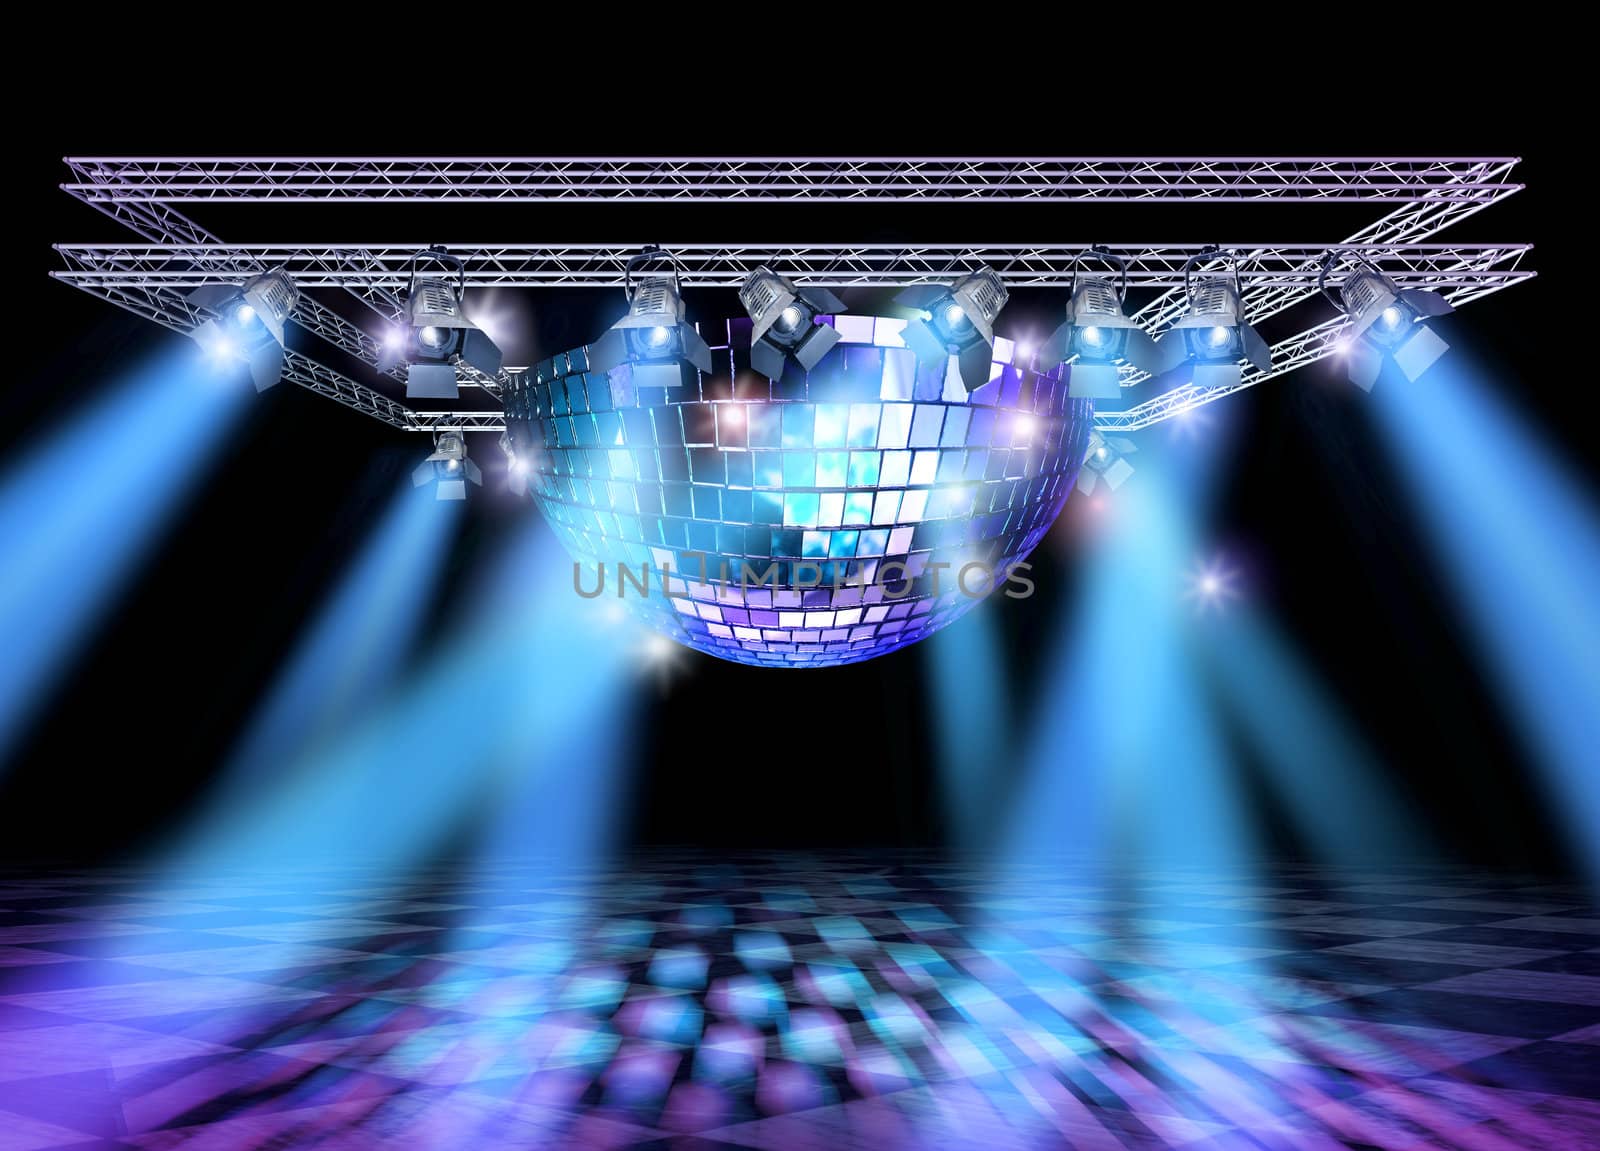 Stage lighting with professional spot lights, disco ball and truss construction